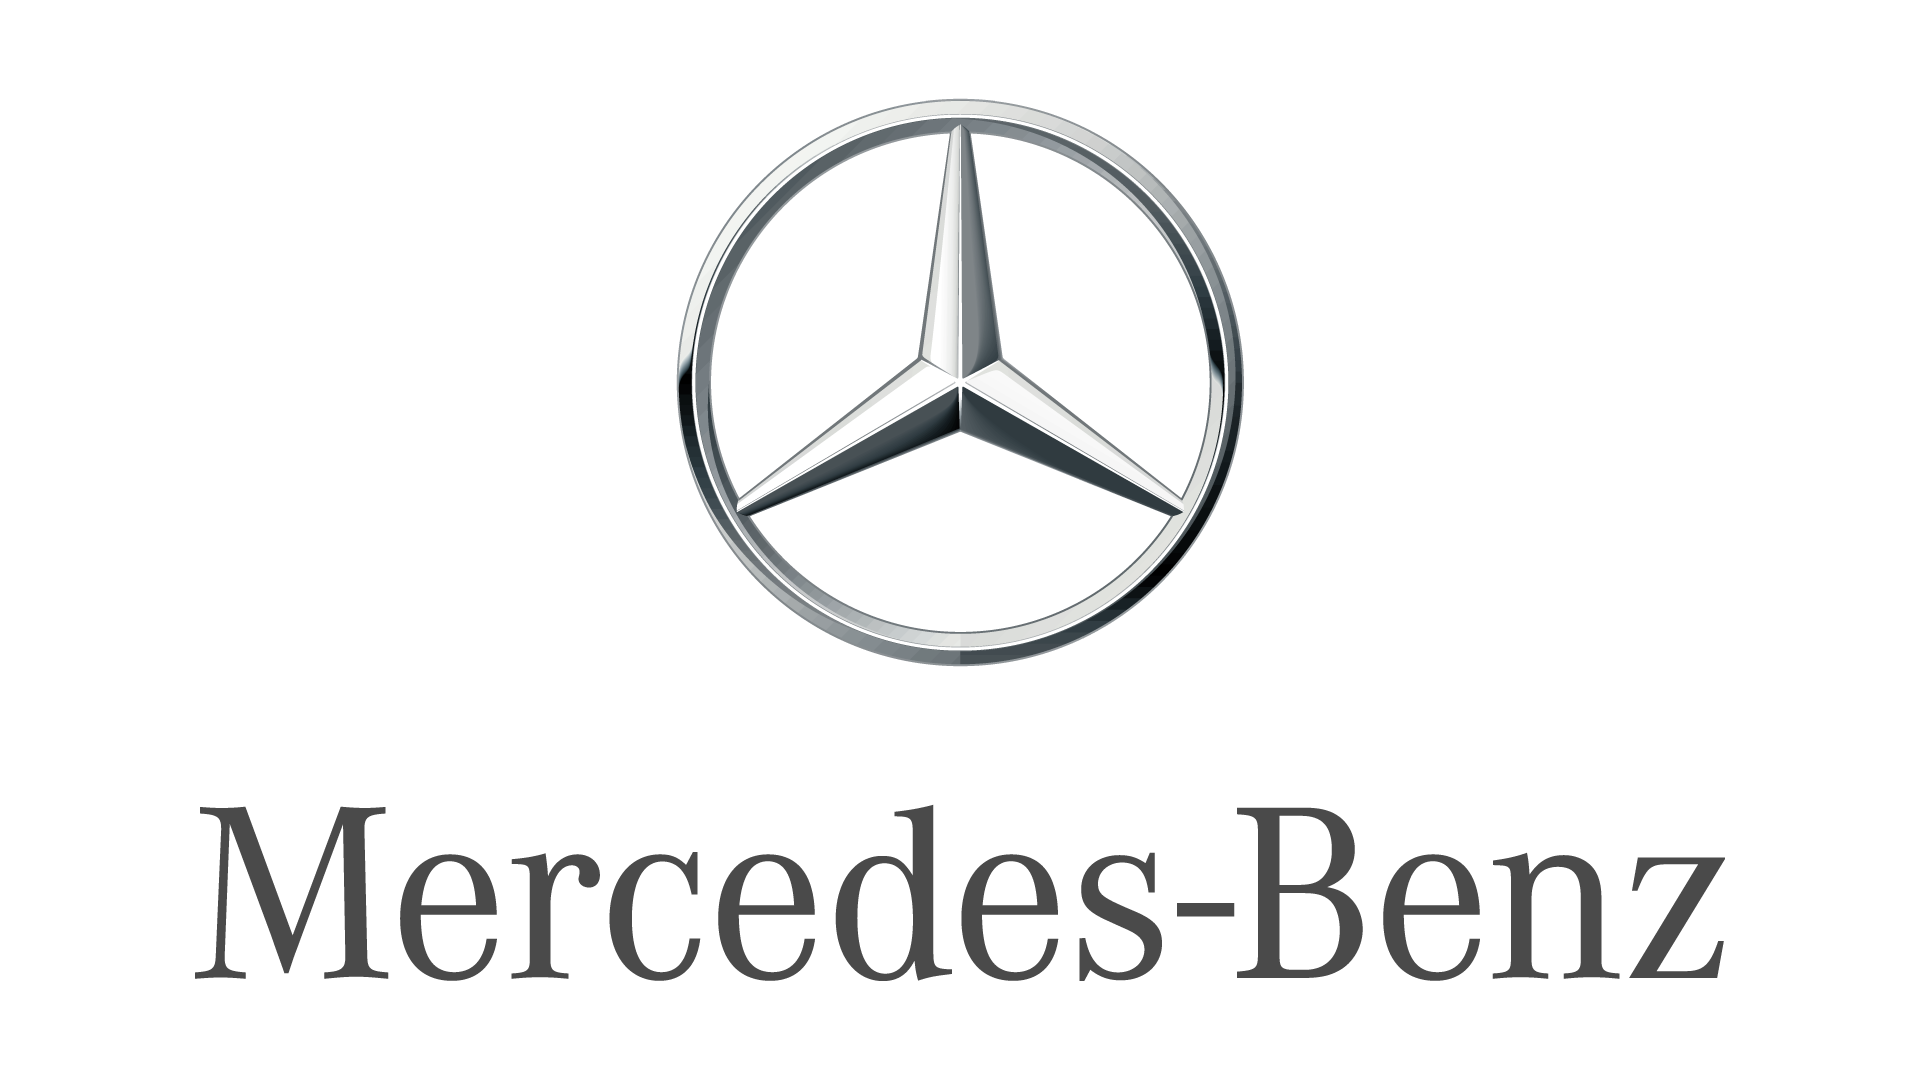 Address for mercedes benz financial forexpros commodities gold